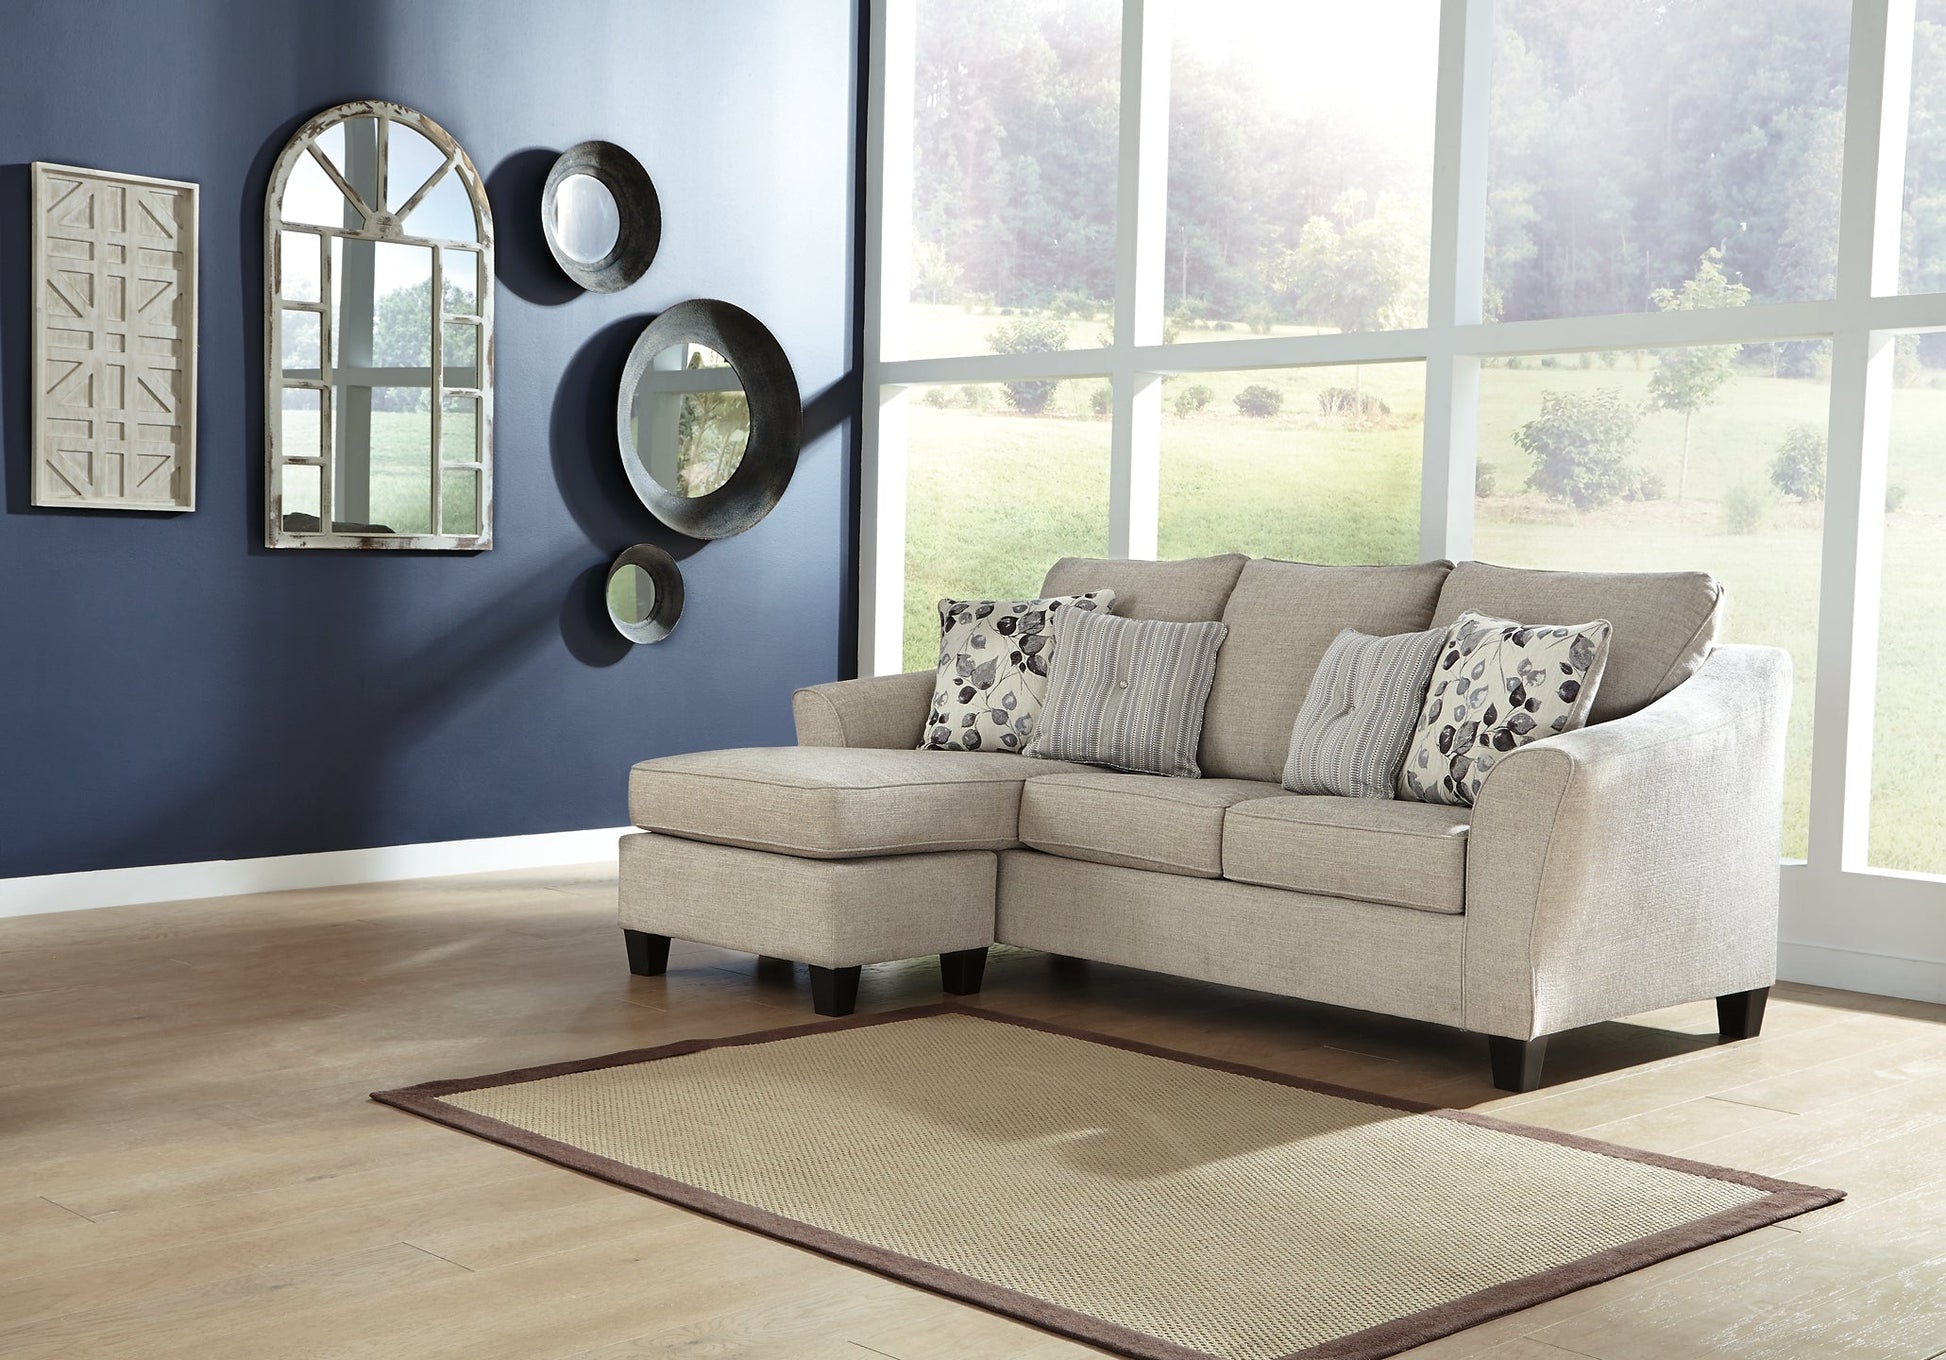 Abney Sofa Chaise Smyrna Furniture Outlet